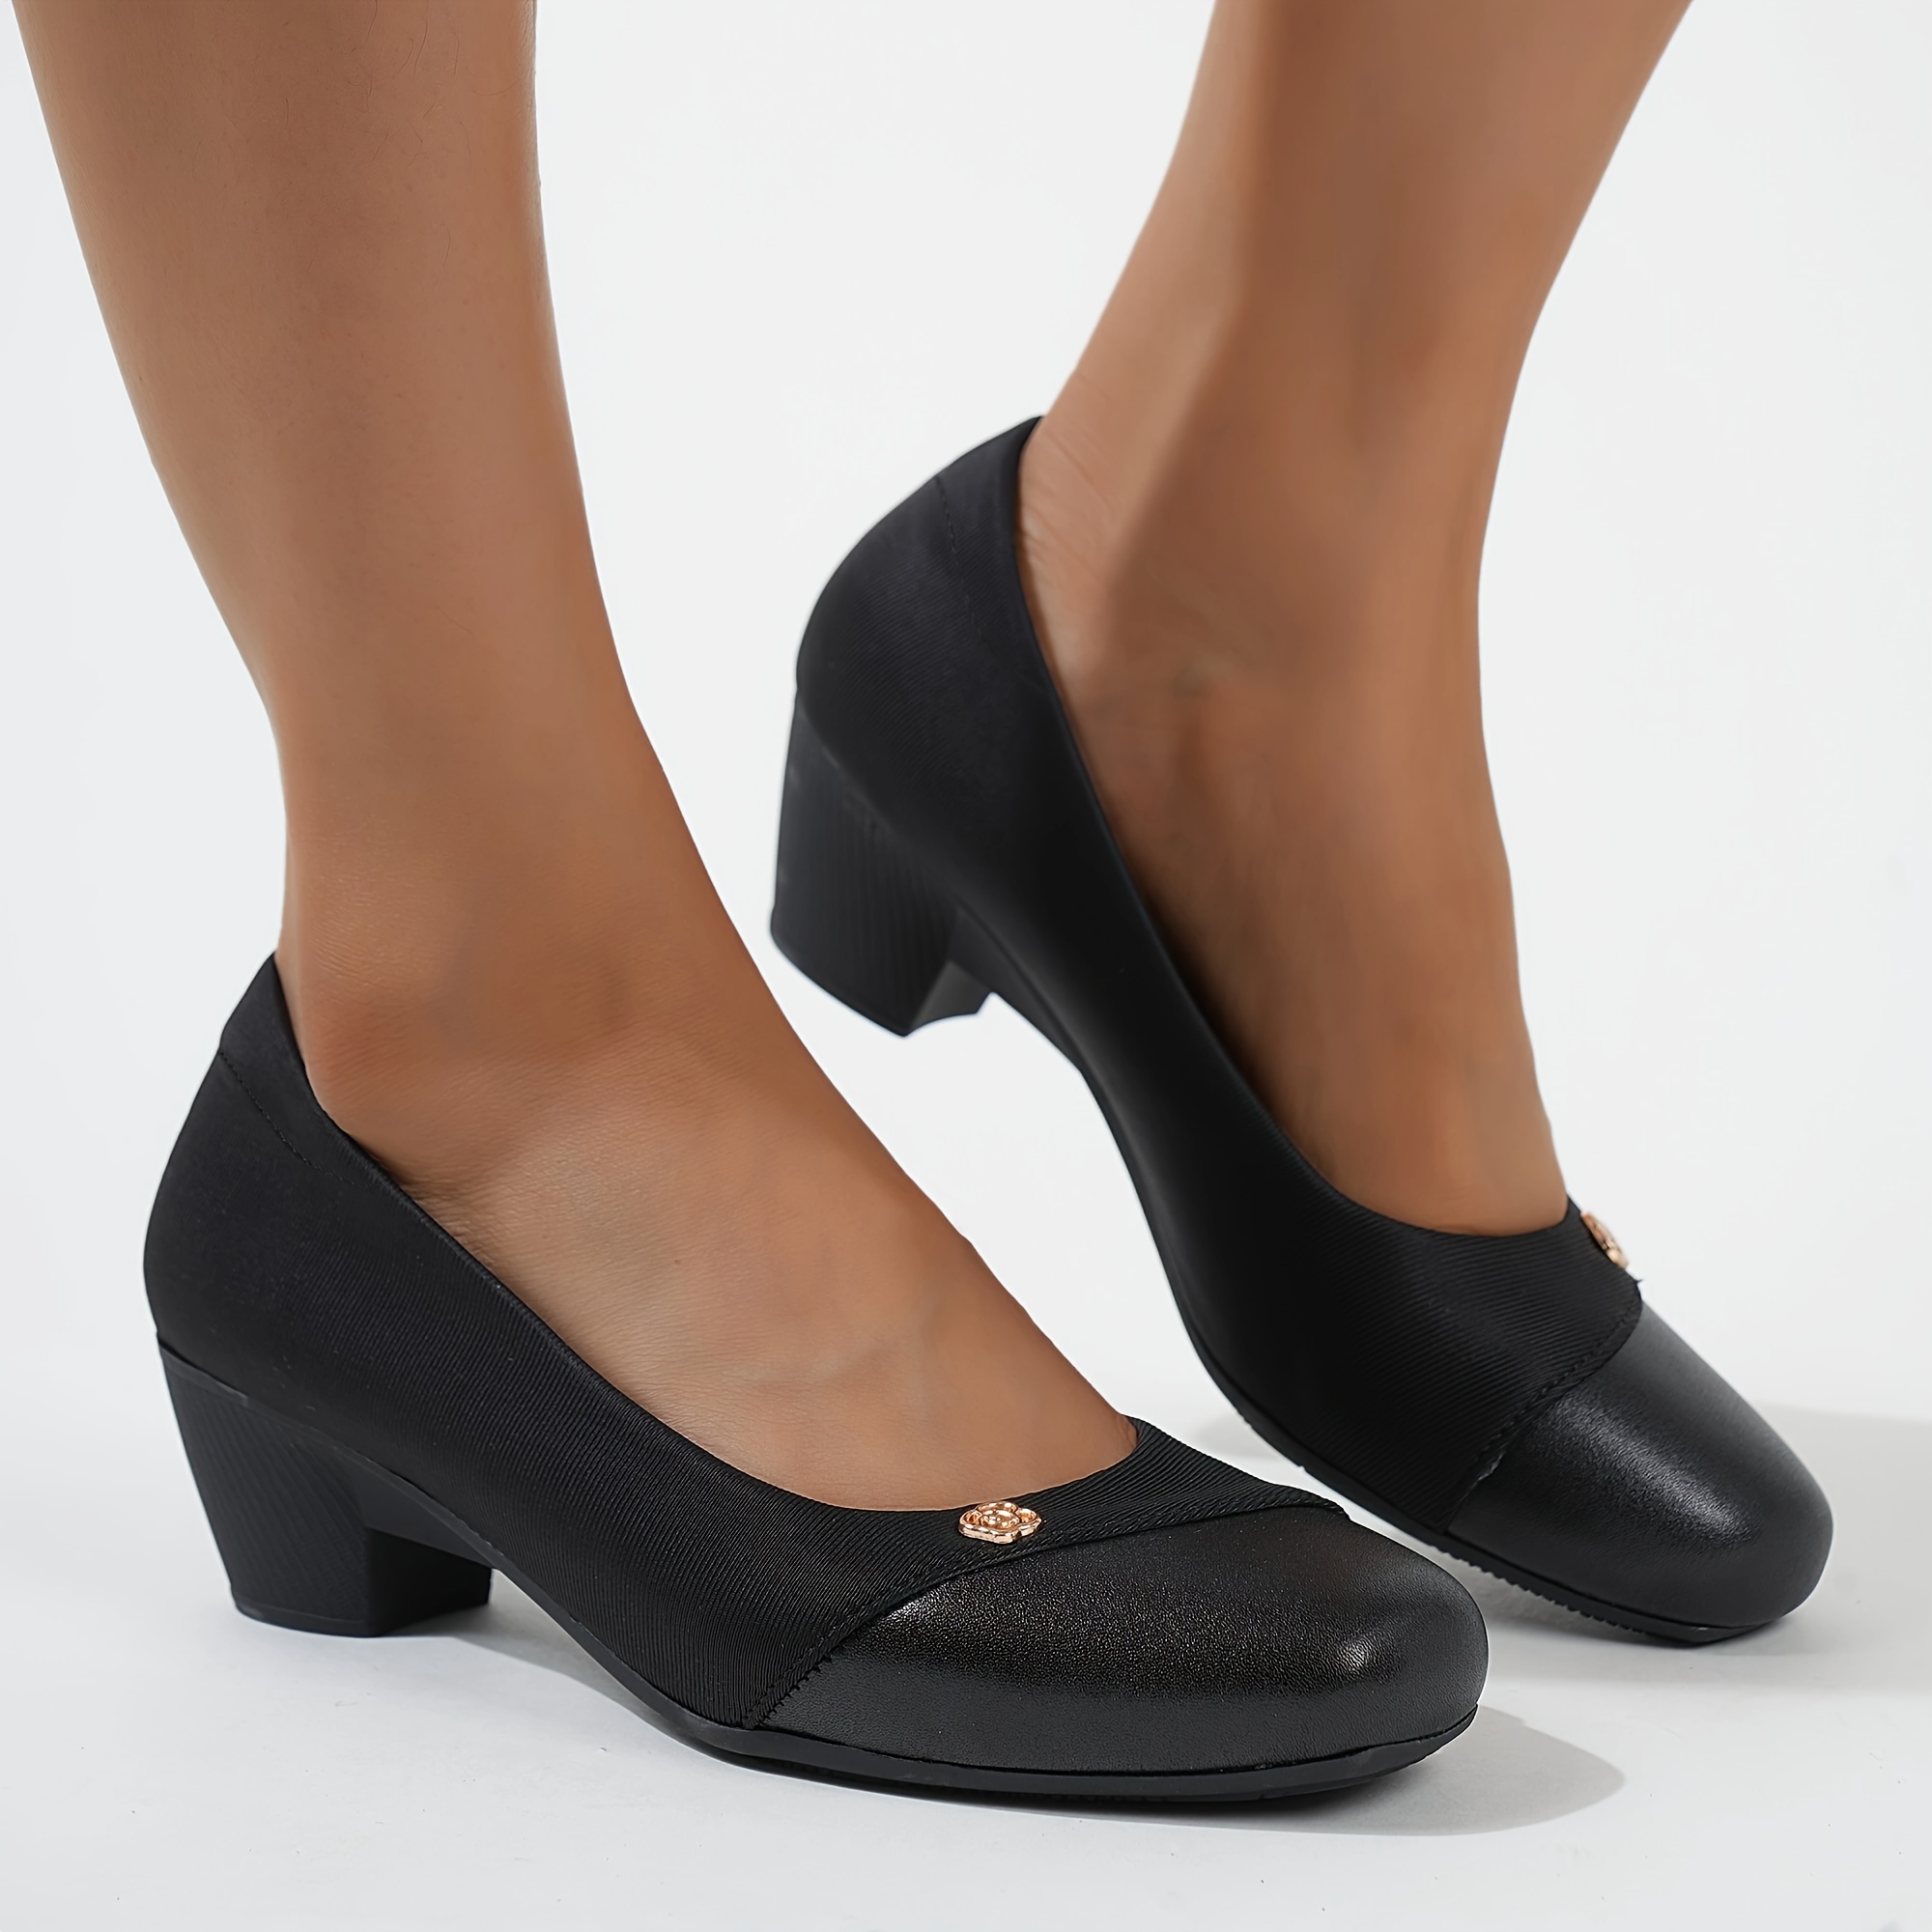 

Women's All-match Black Court Pumps, Comfy Slip On Chunky Low Heels, Casual Office Commuter Work Shoes